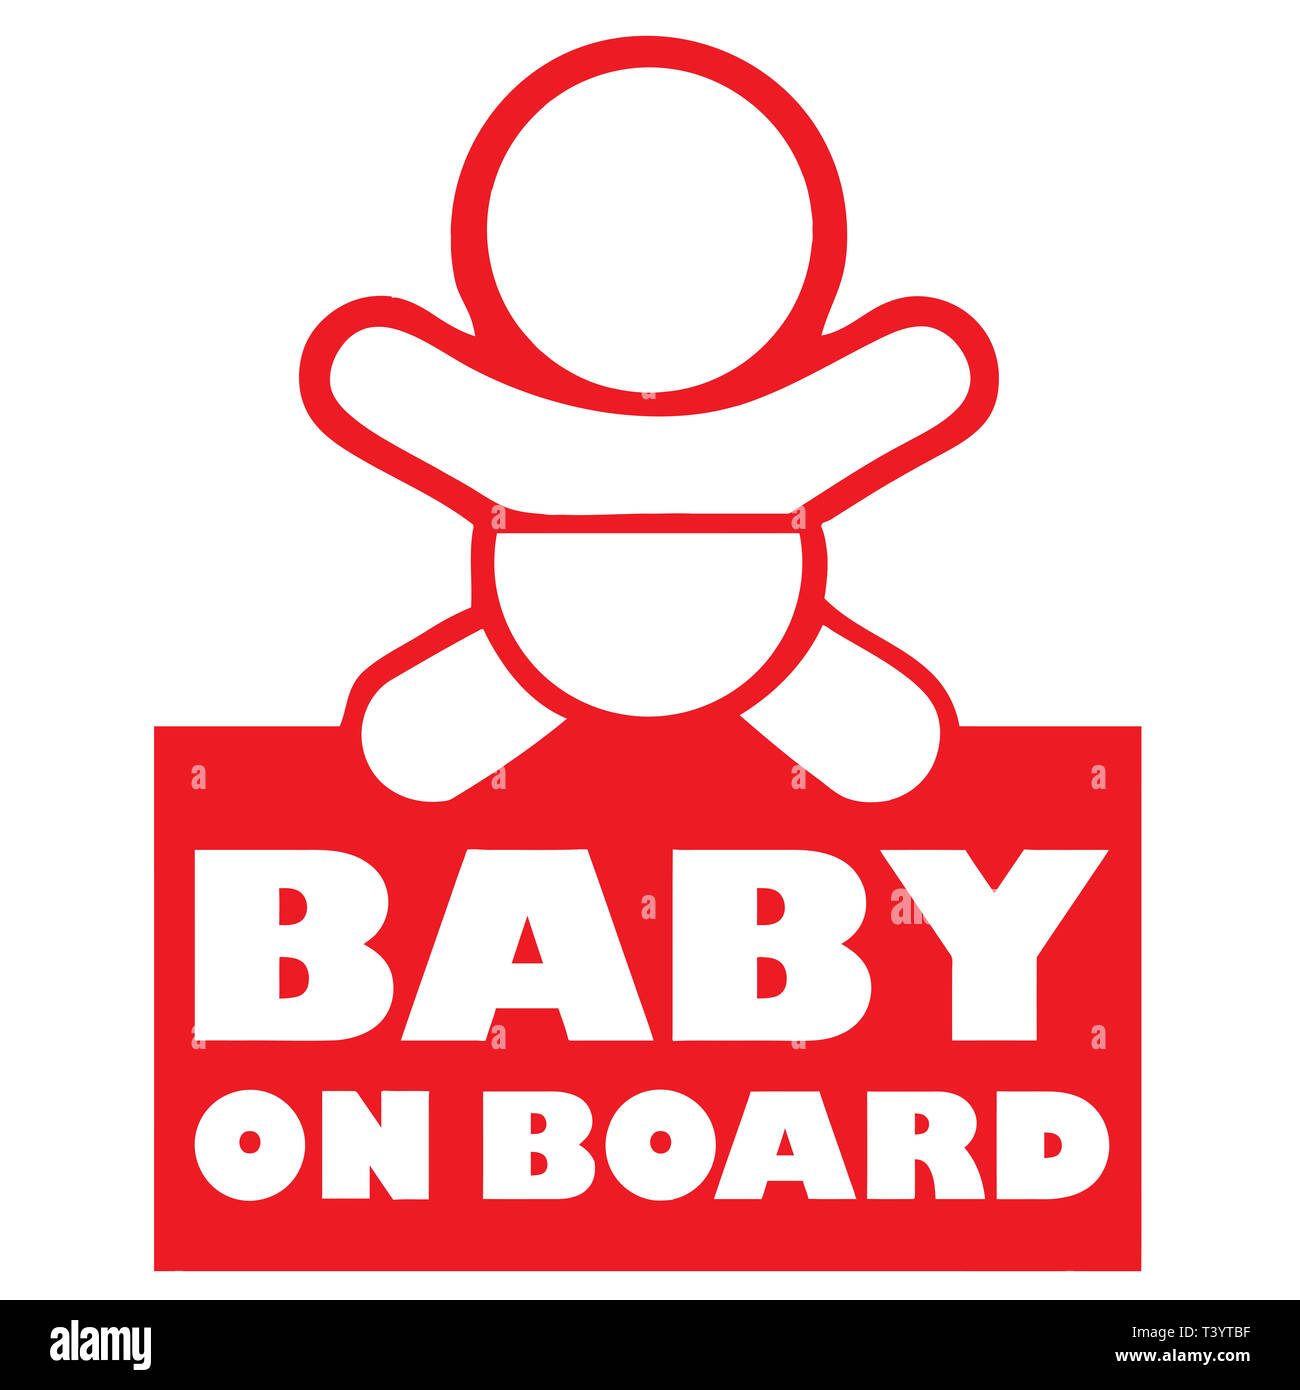 car baby on board transport safety travel illustration red drive Stock Photo